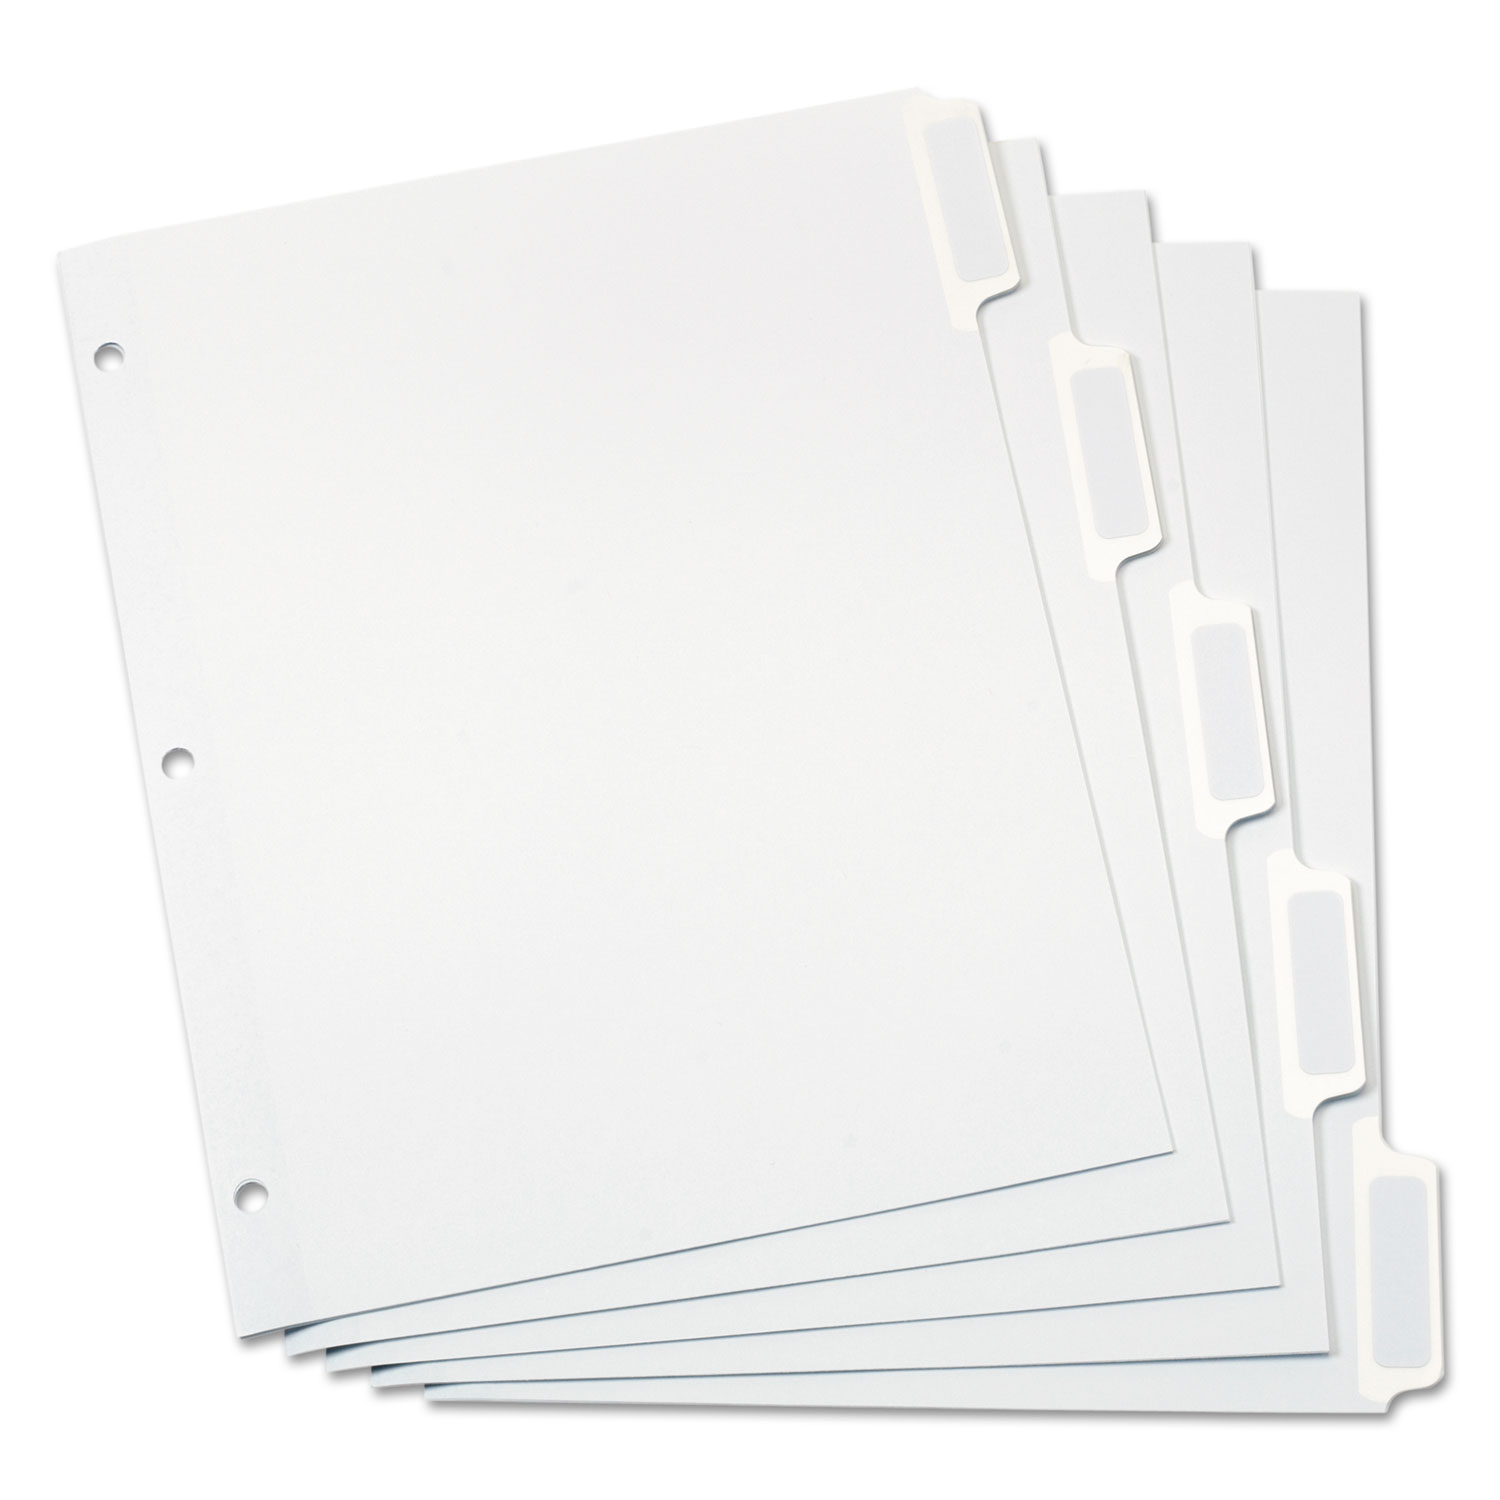  Oxford 11314EE Custom Label Tab Dividers with Self-Adhesive Tab Labels, 5-Tab, 11 x 8.5, White, 25 Sets (OXF11314) 